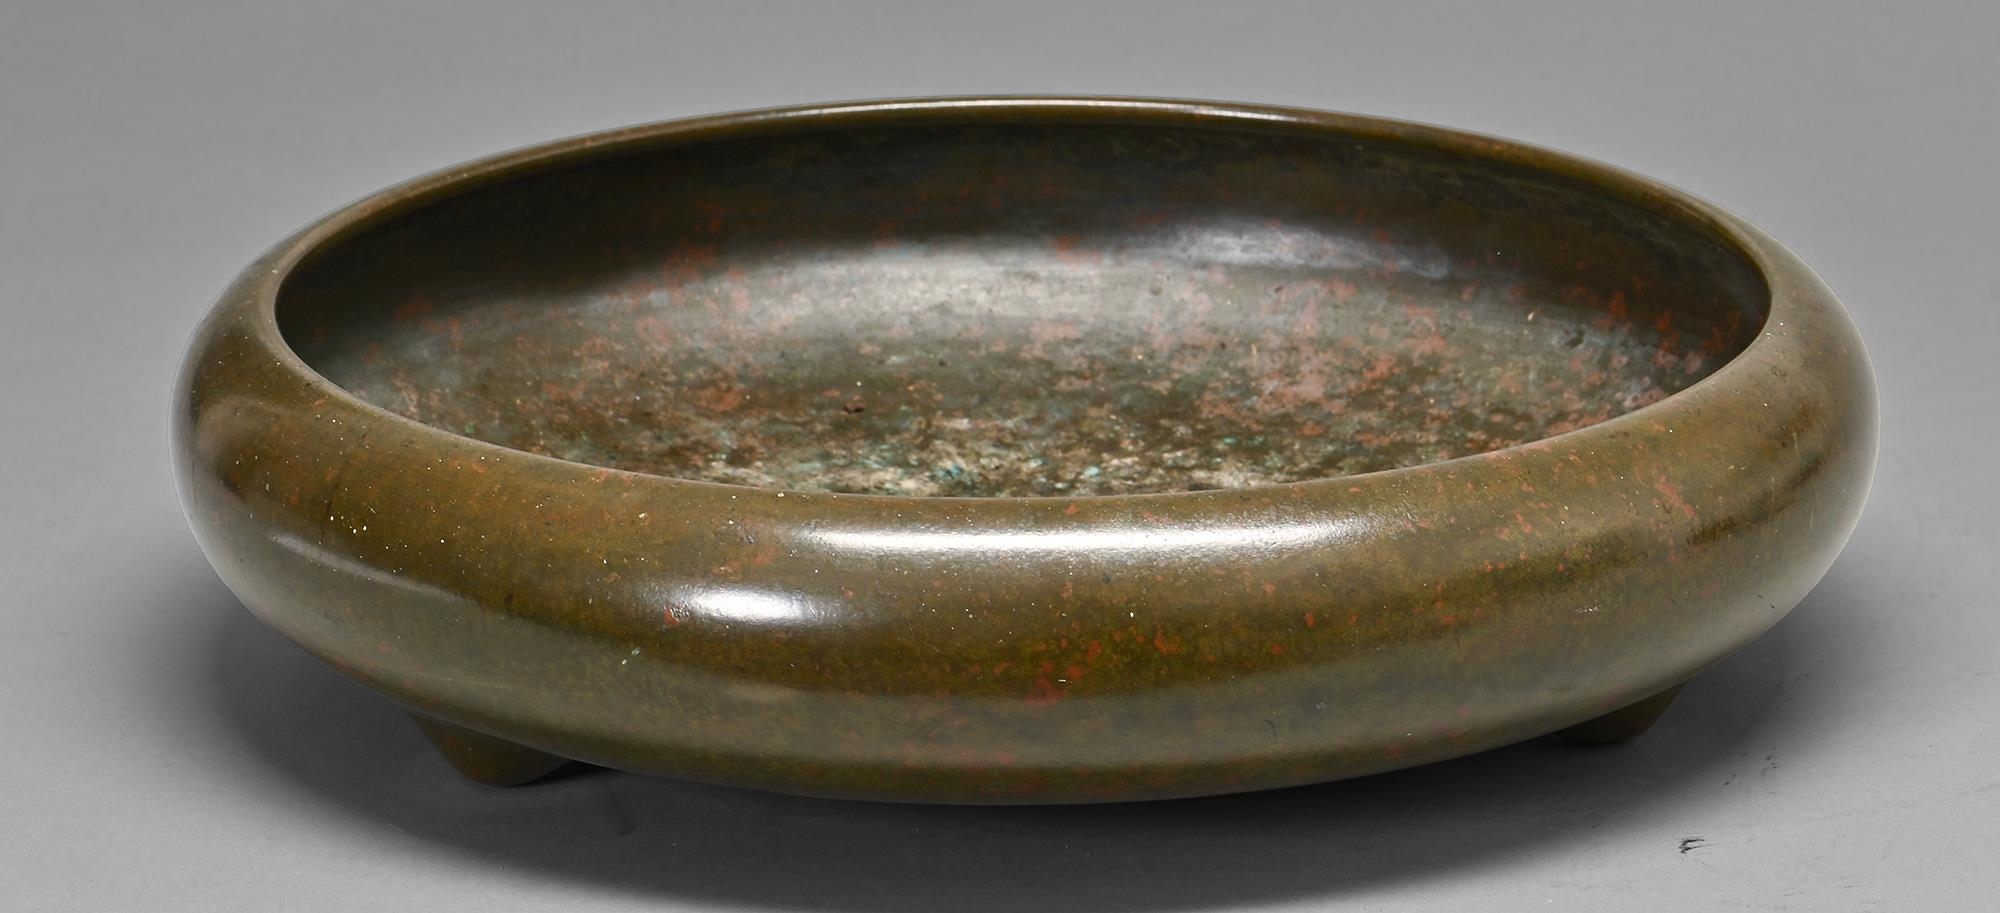 A Japanese bronze flower arrangement  bowl, Meiji period, of shallow rounded form with inverted